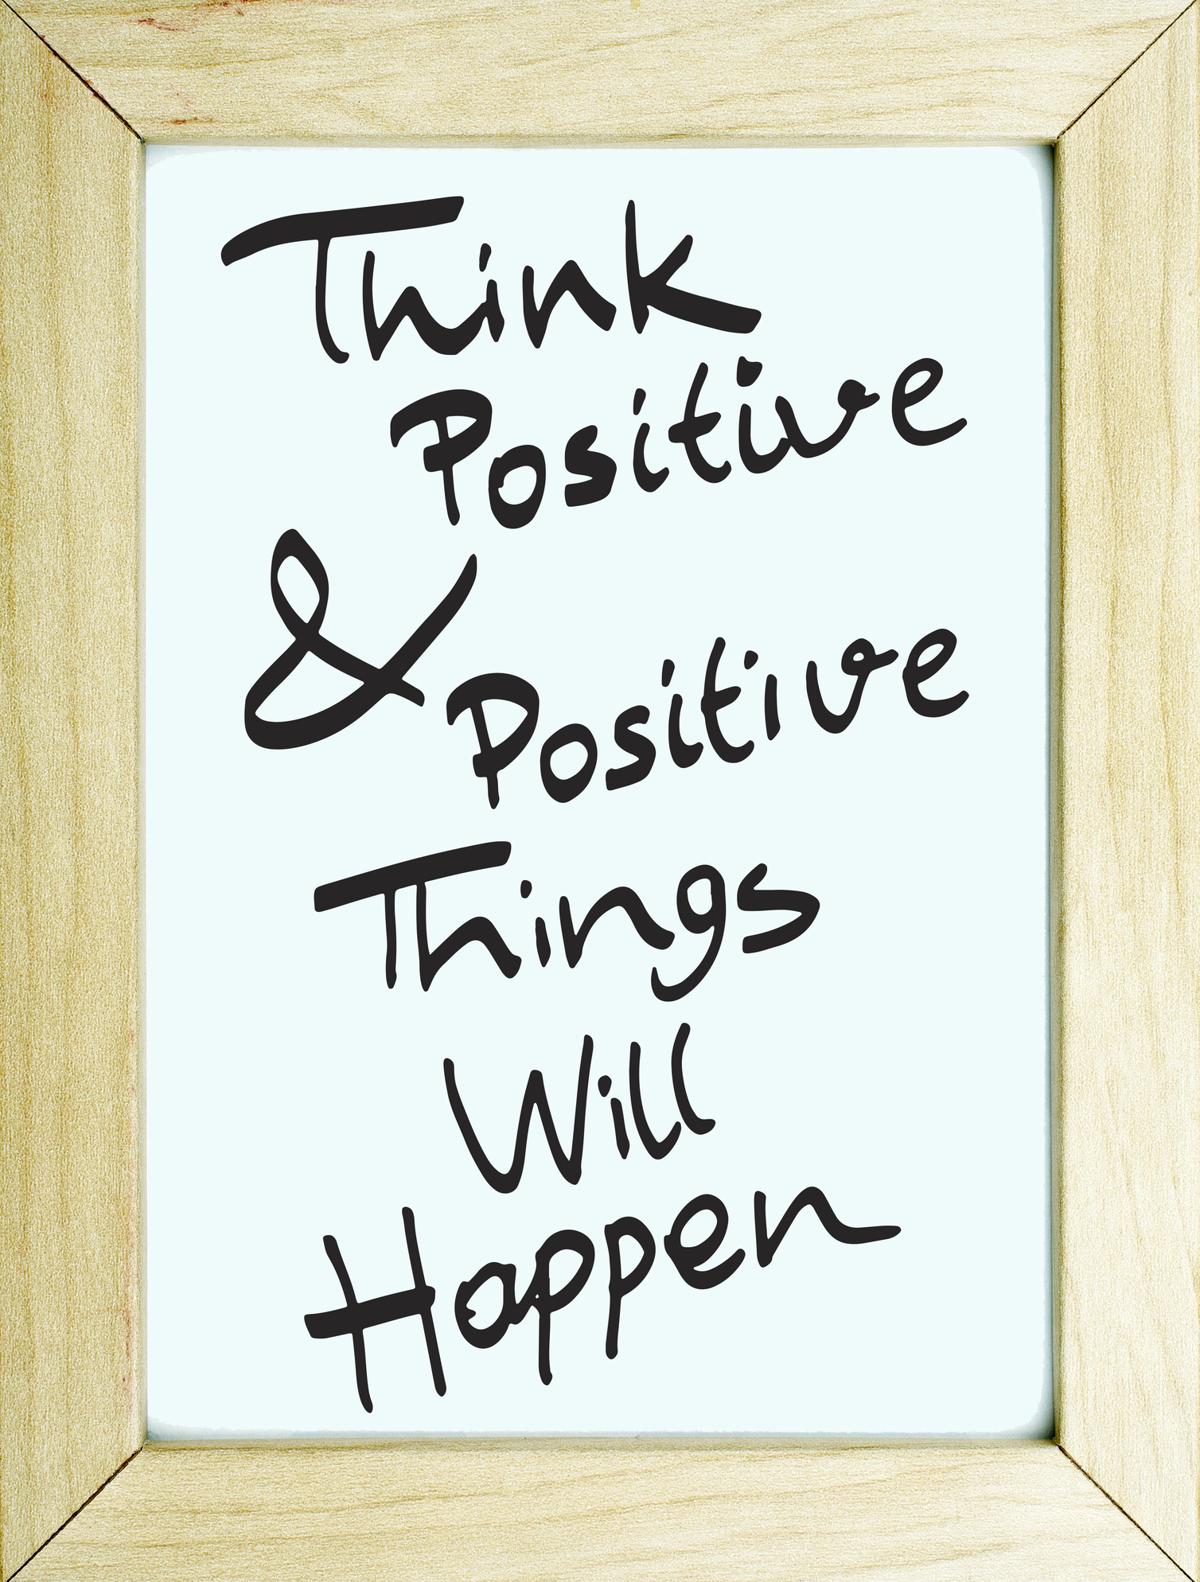 Some Positive Thinking Quotes and Phrases to Brighten Your ...